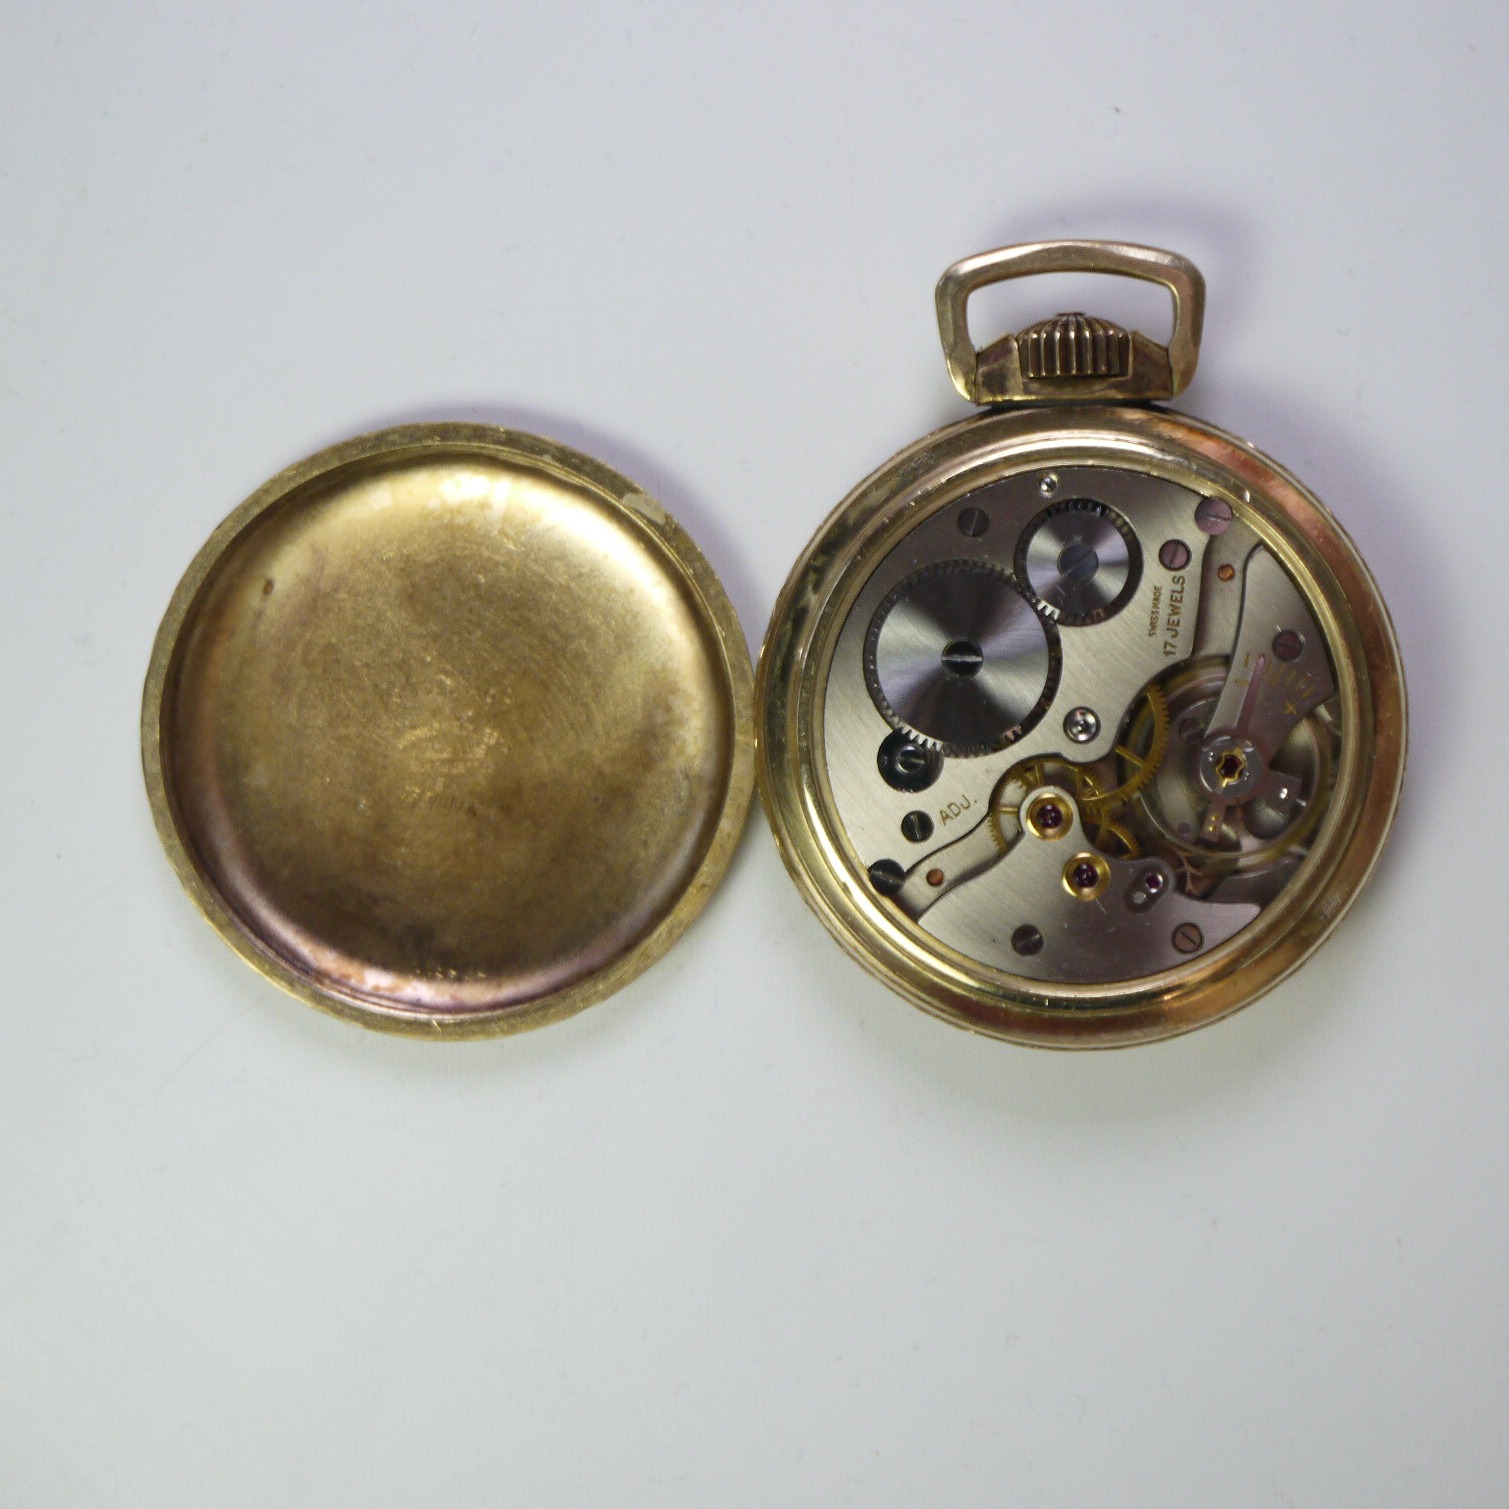 ball pocket watch serial numbers